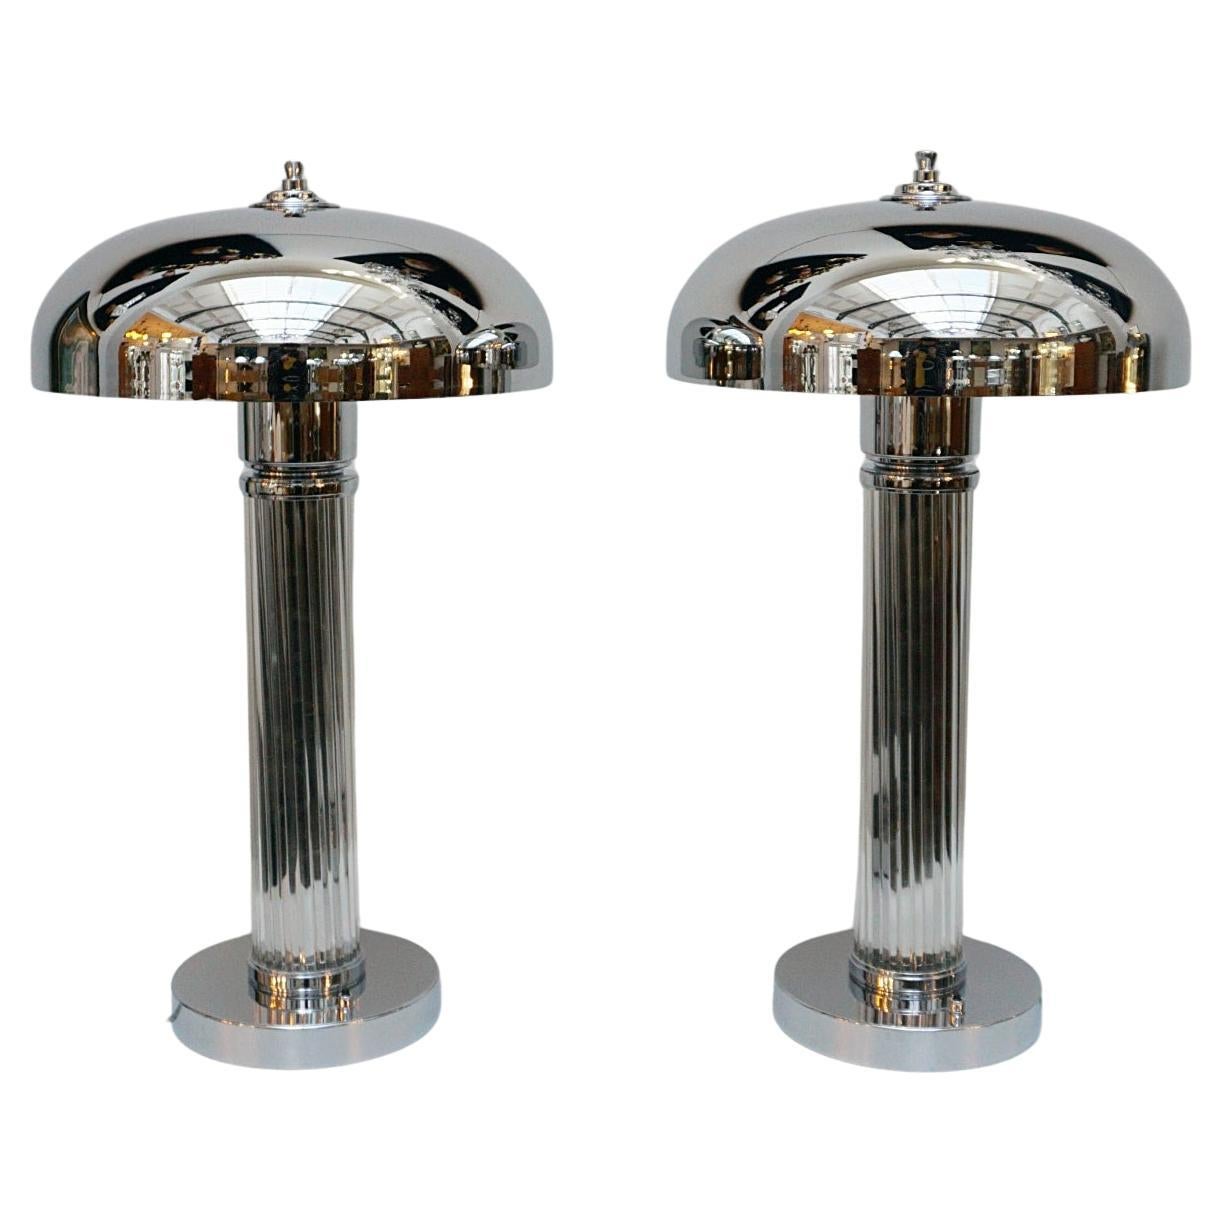 A pair of Tall Art Deco Glass Rod Table Lamps